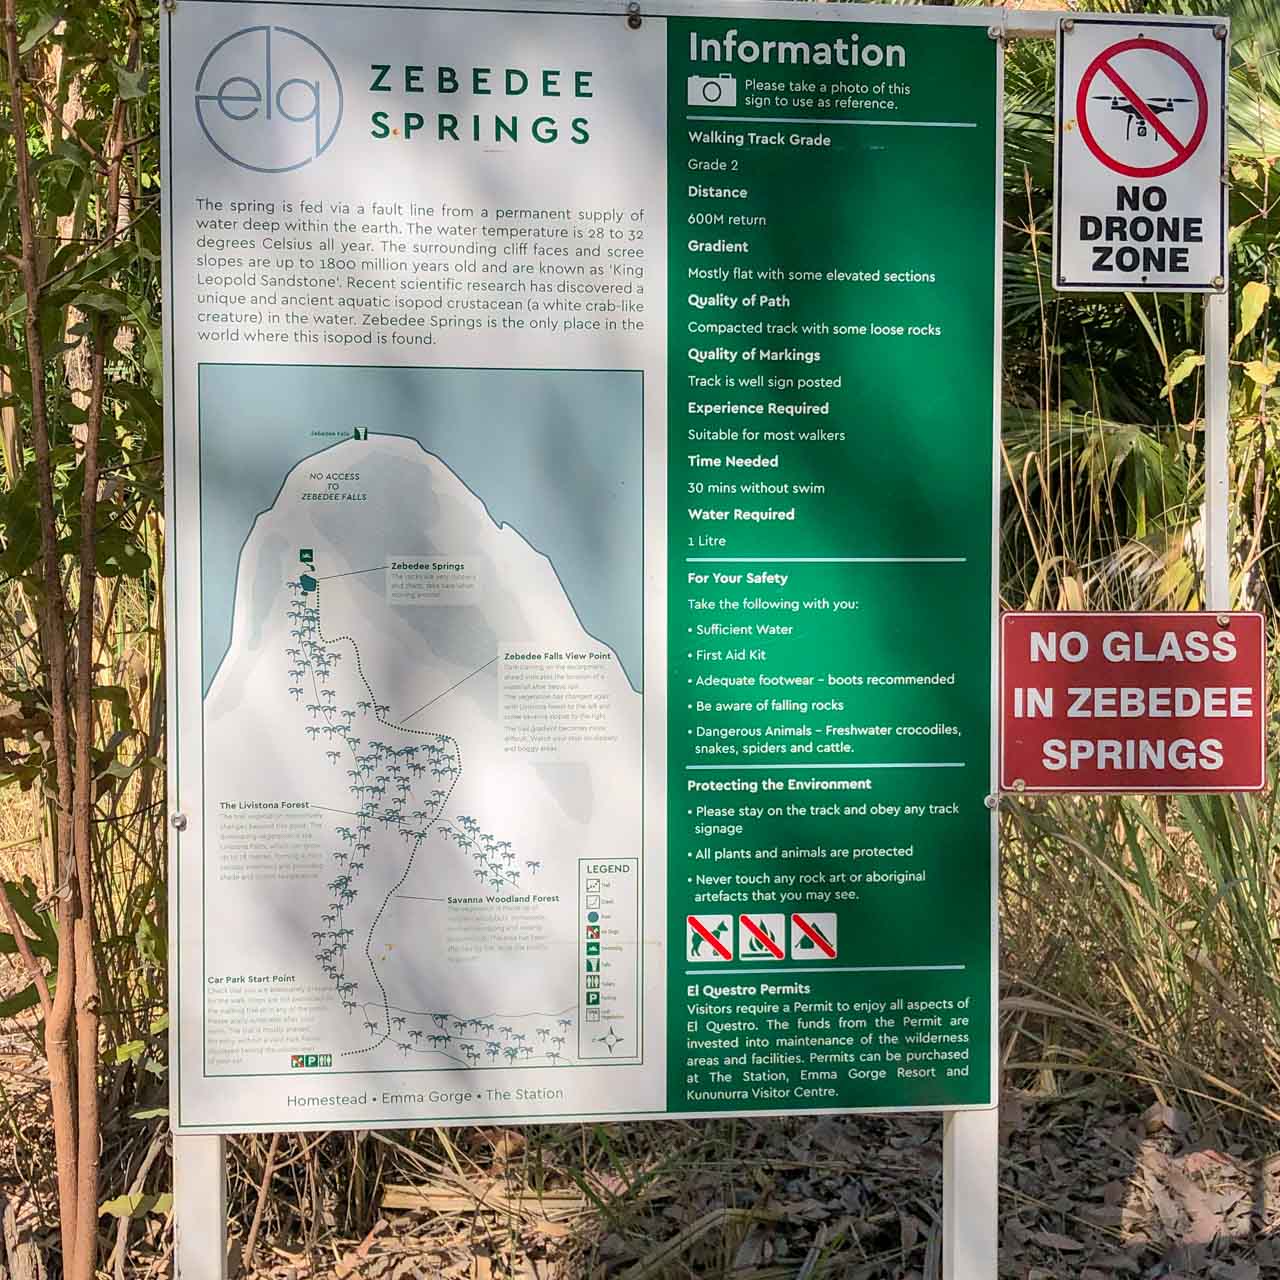 A sign showing walking information to a thermal spring